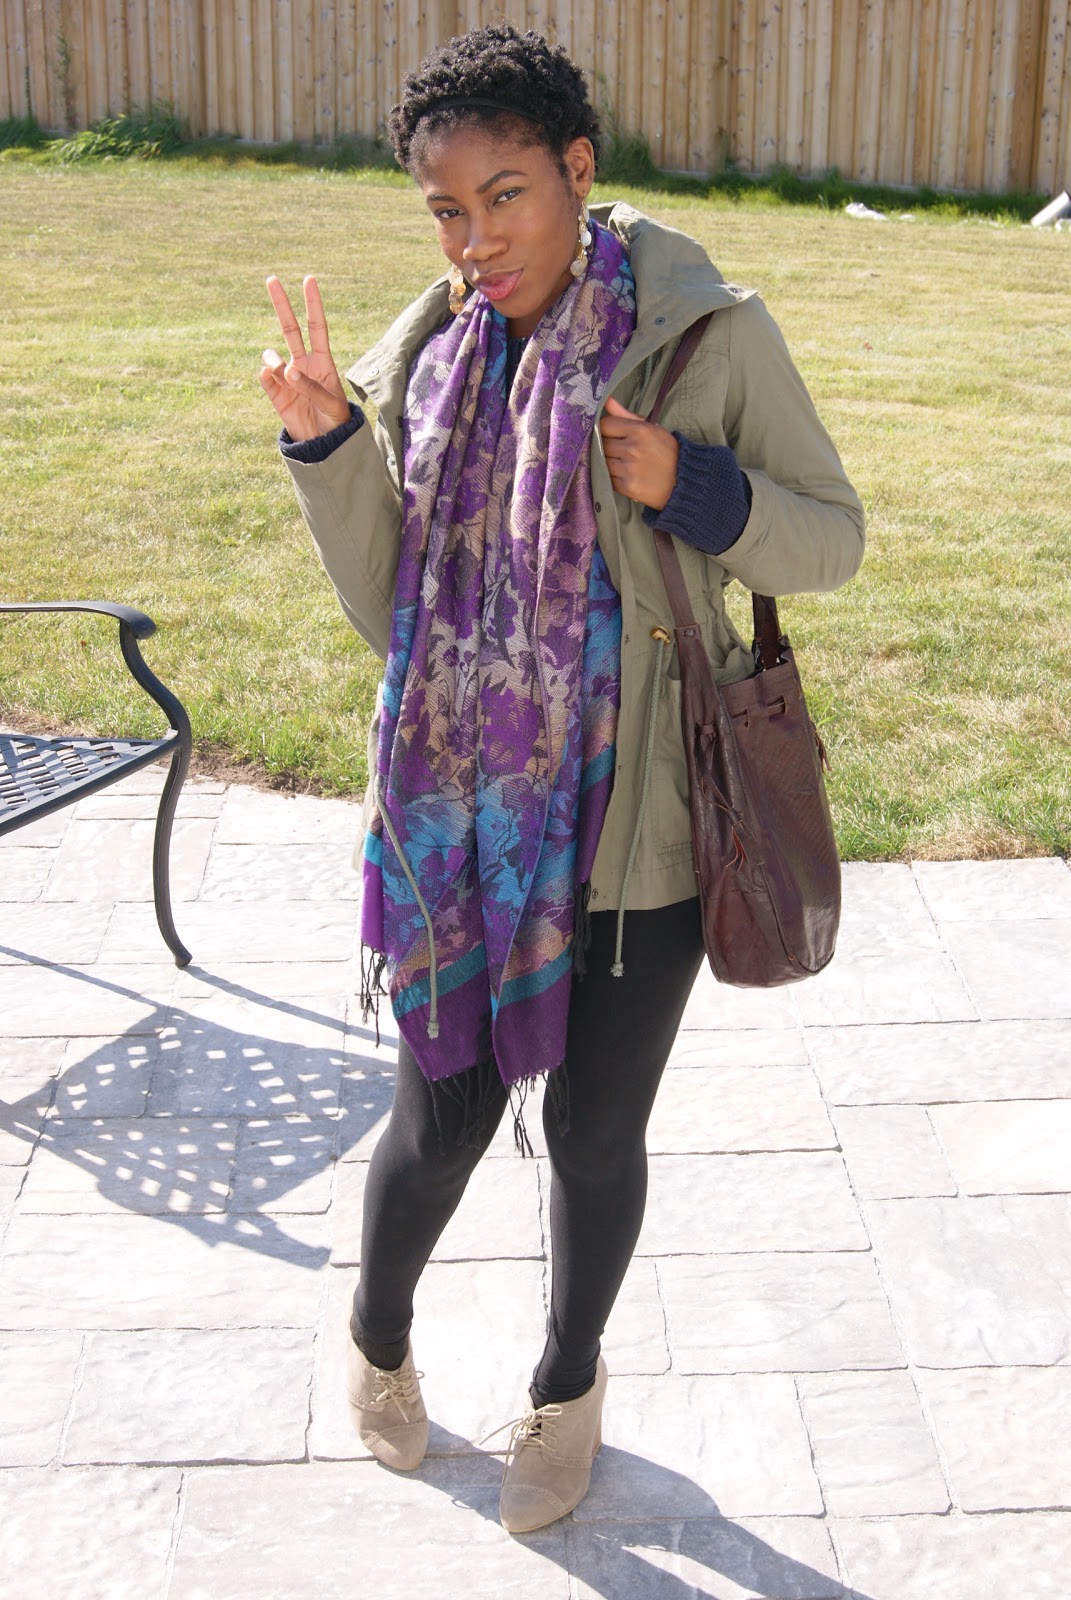 wearing a black long seelve top, a navy blue sweater, a scarf and a light jacket